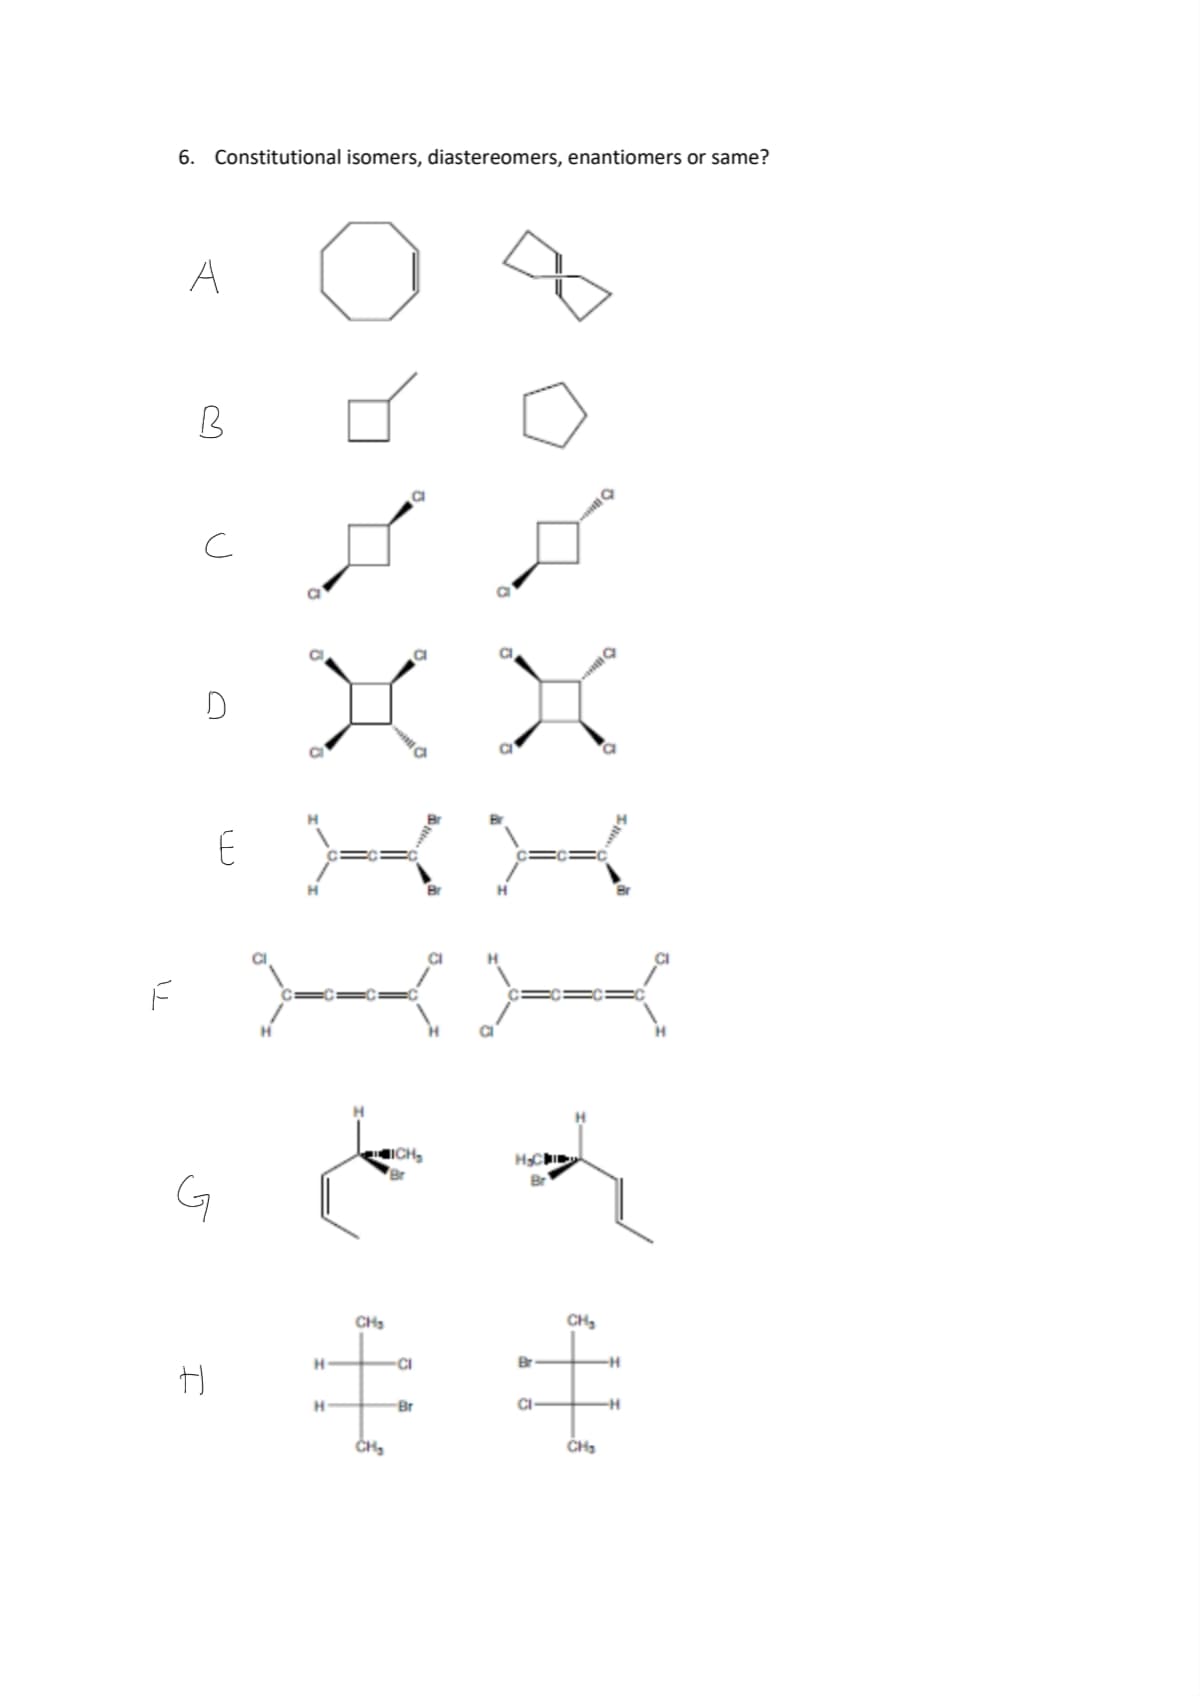 6. Constitutional isomers, diastereomers, enantiomers or same?
A
CI
CI
E
ICH,
Br
CH
CH,
CI
Br
H.
Br
CI-
CH,
CH
